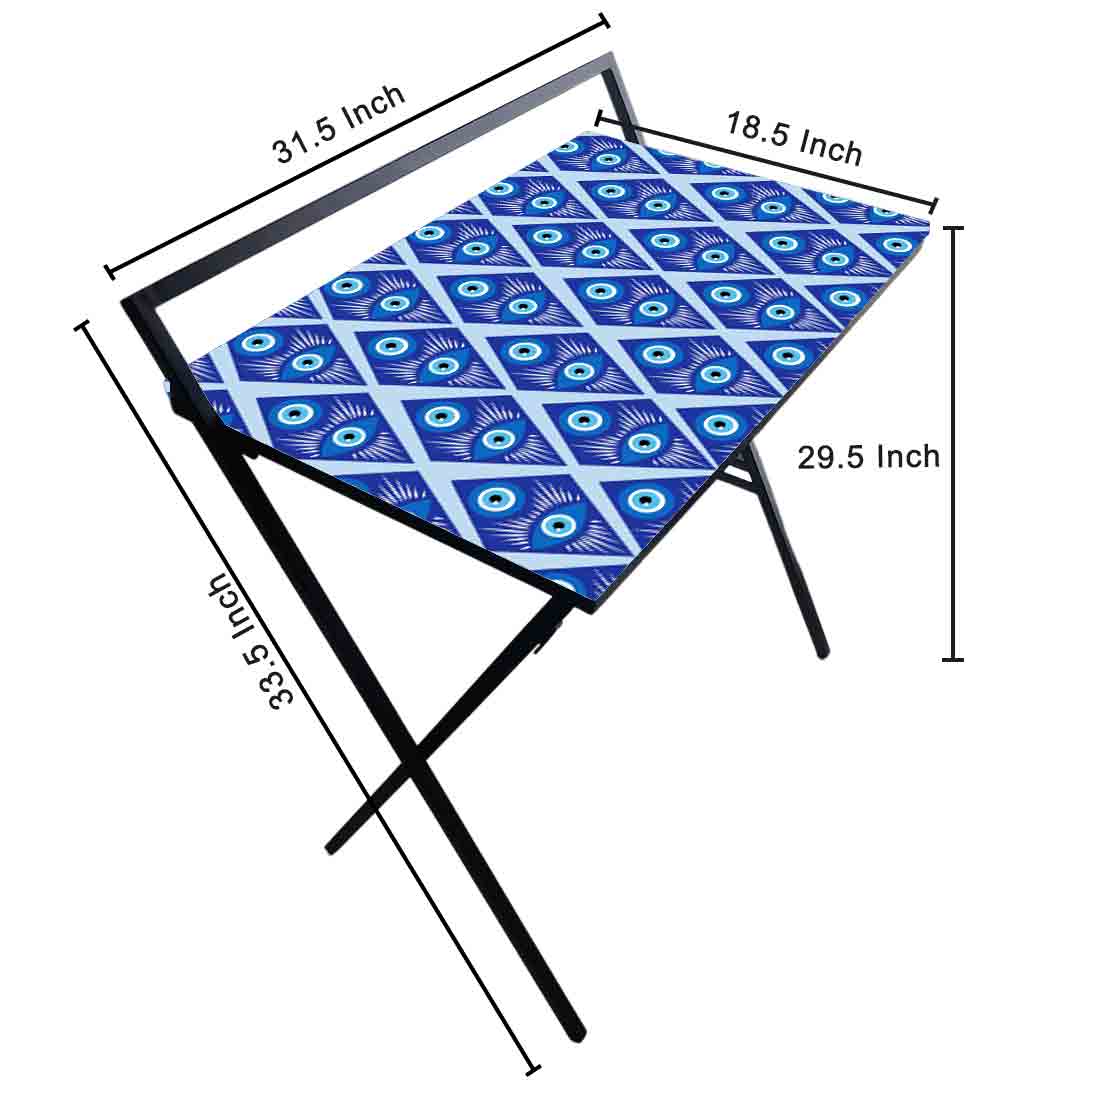 Foldable Study Table for Computer Desk Work From Home -  Evil Eye Protector Nutcase